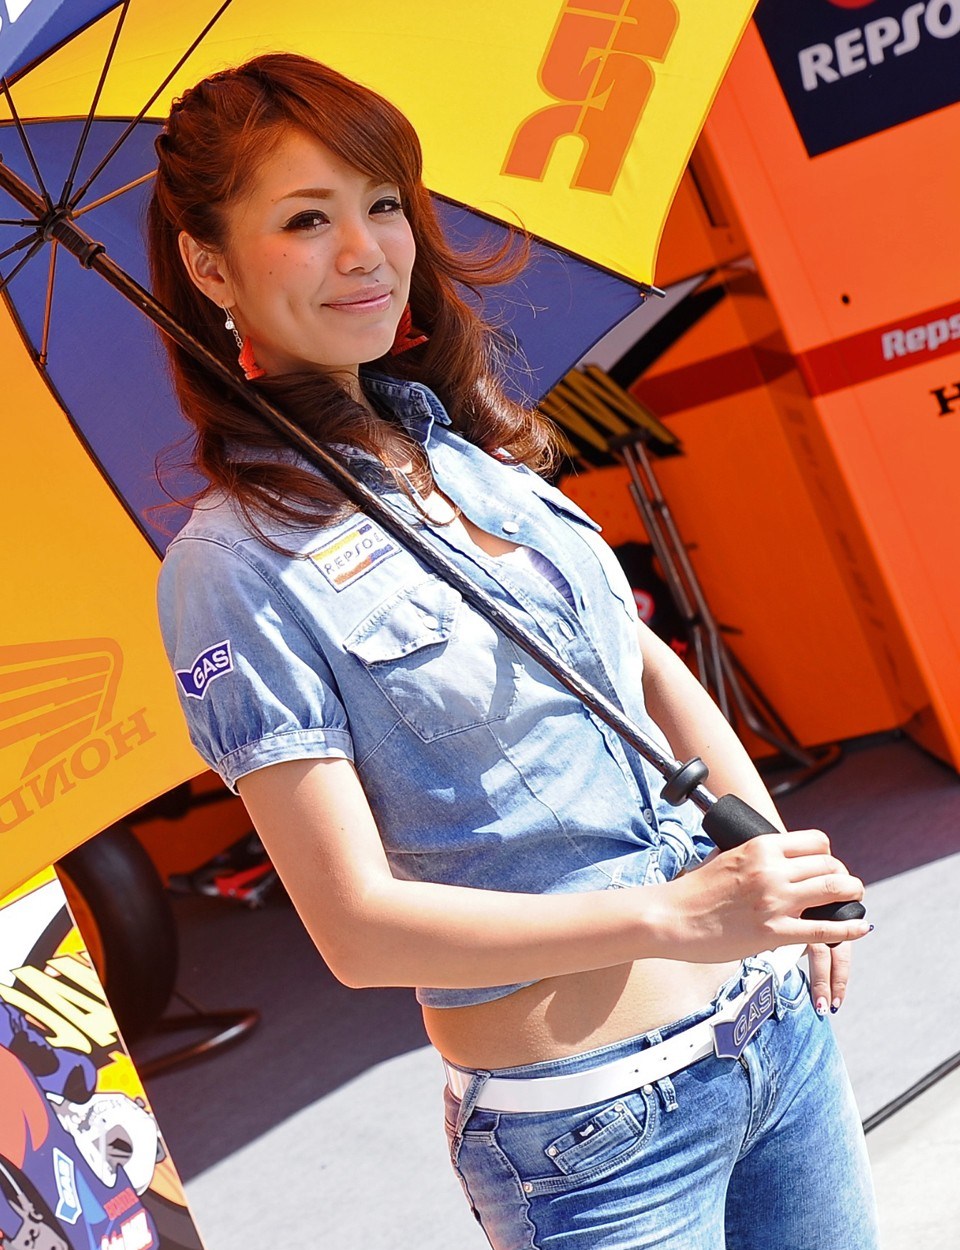 Pictures of Paddock Girls for Moto GP - Japan (1) ~ Just A 